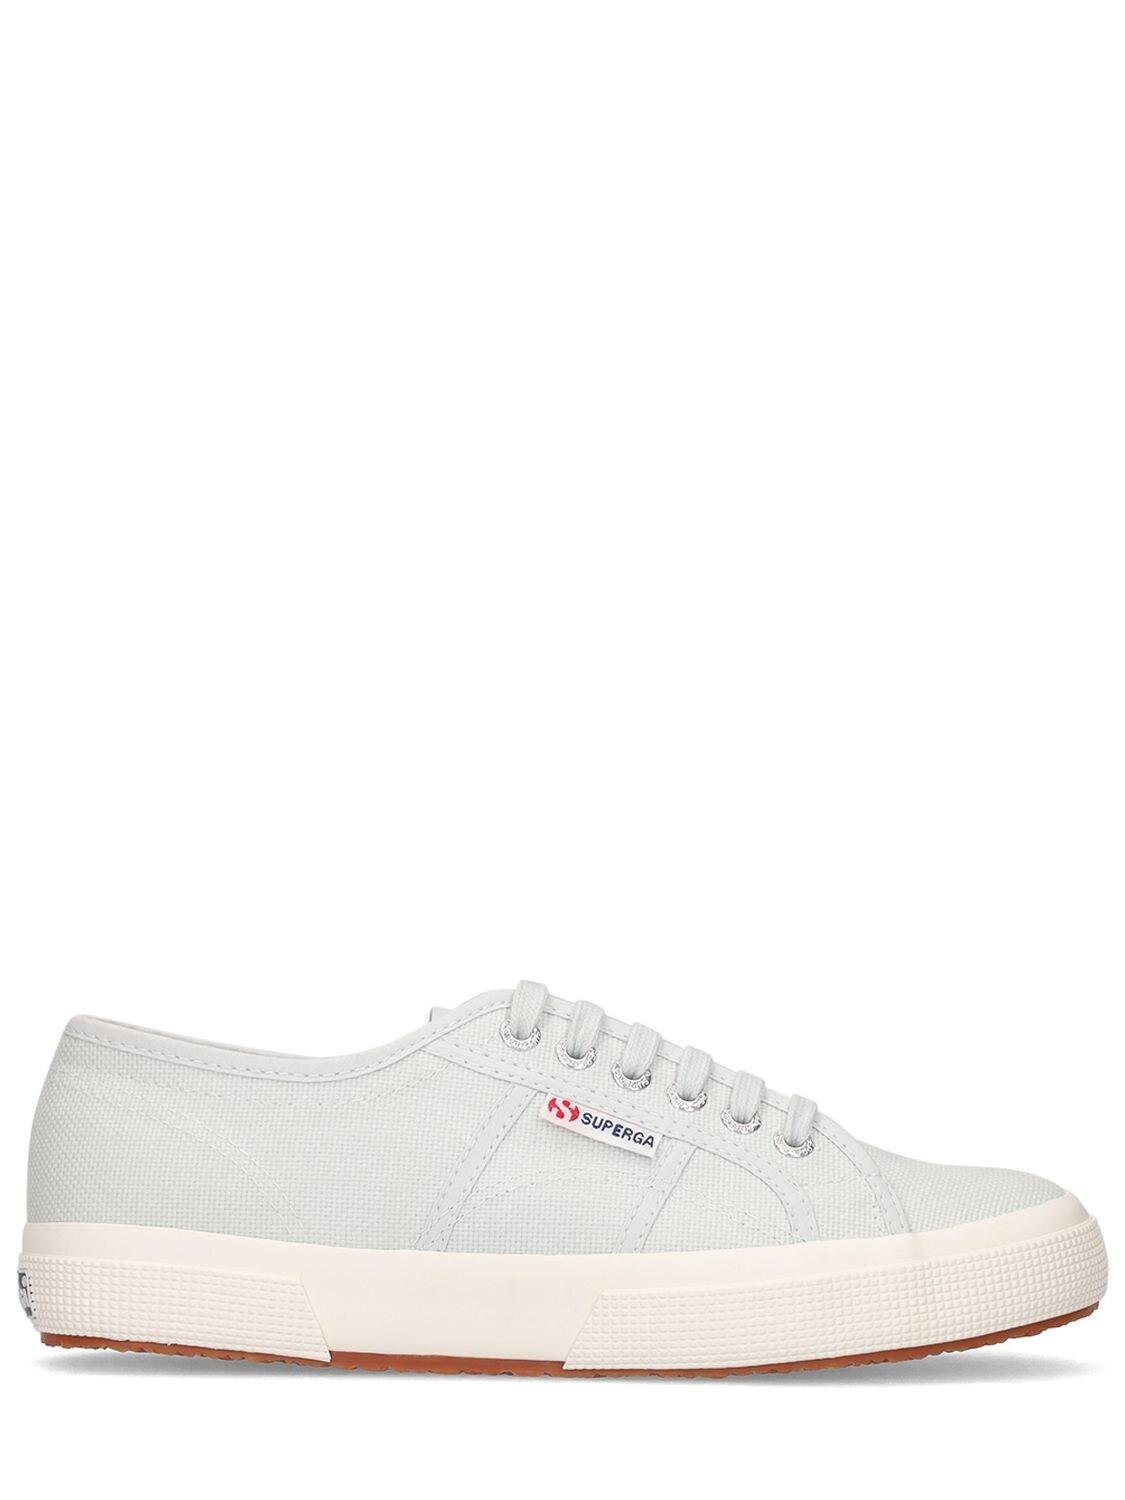 Superga Logo Canvas Sneakers in Light Blue (White) | Lyst